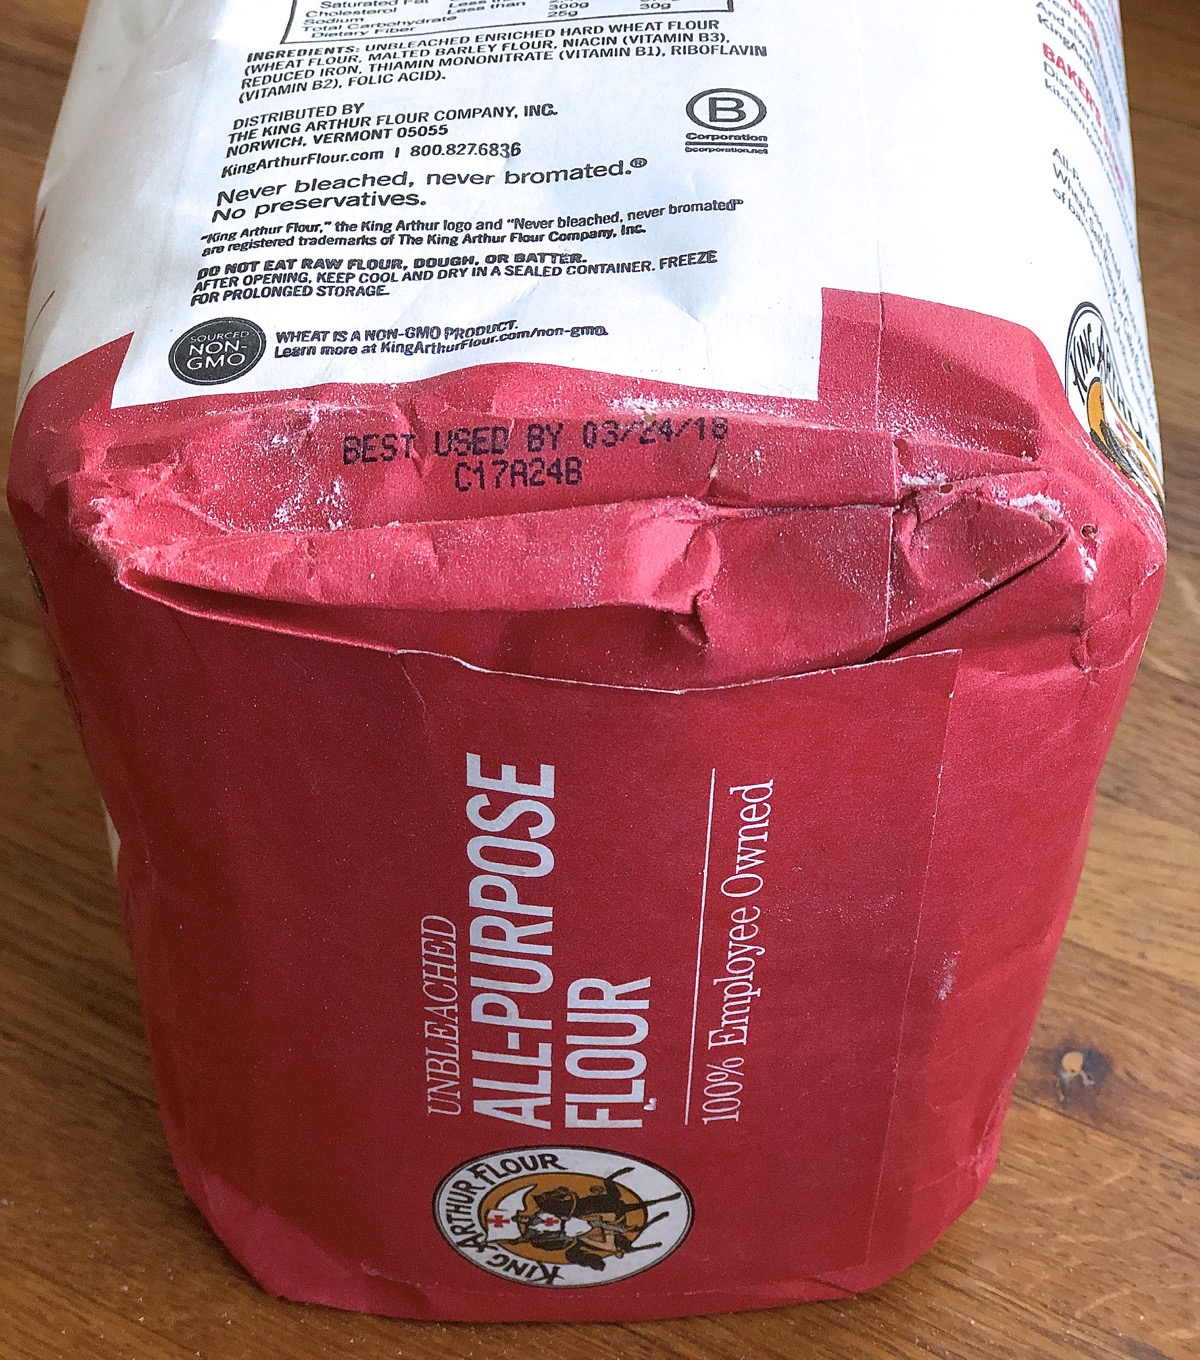 Bag of King Arthur all-purpose flour showing a 2018 best-by date.